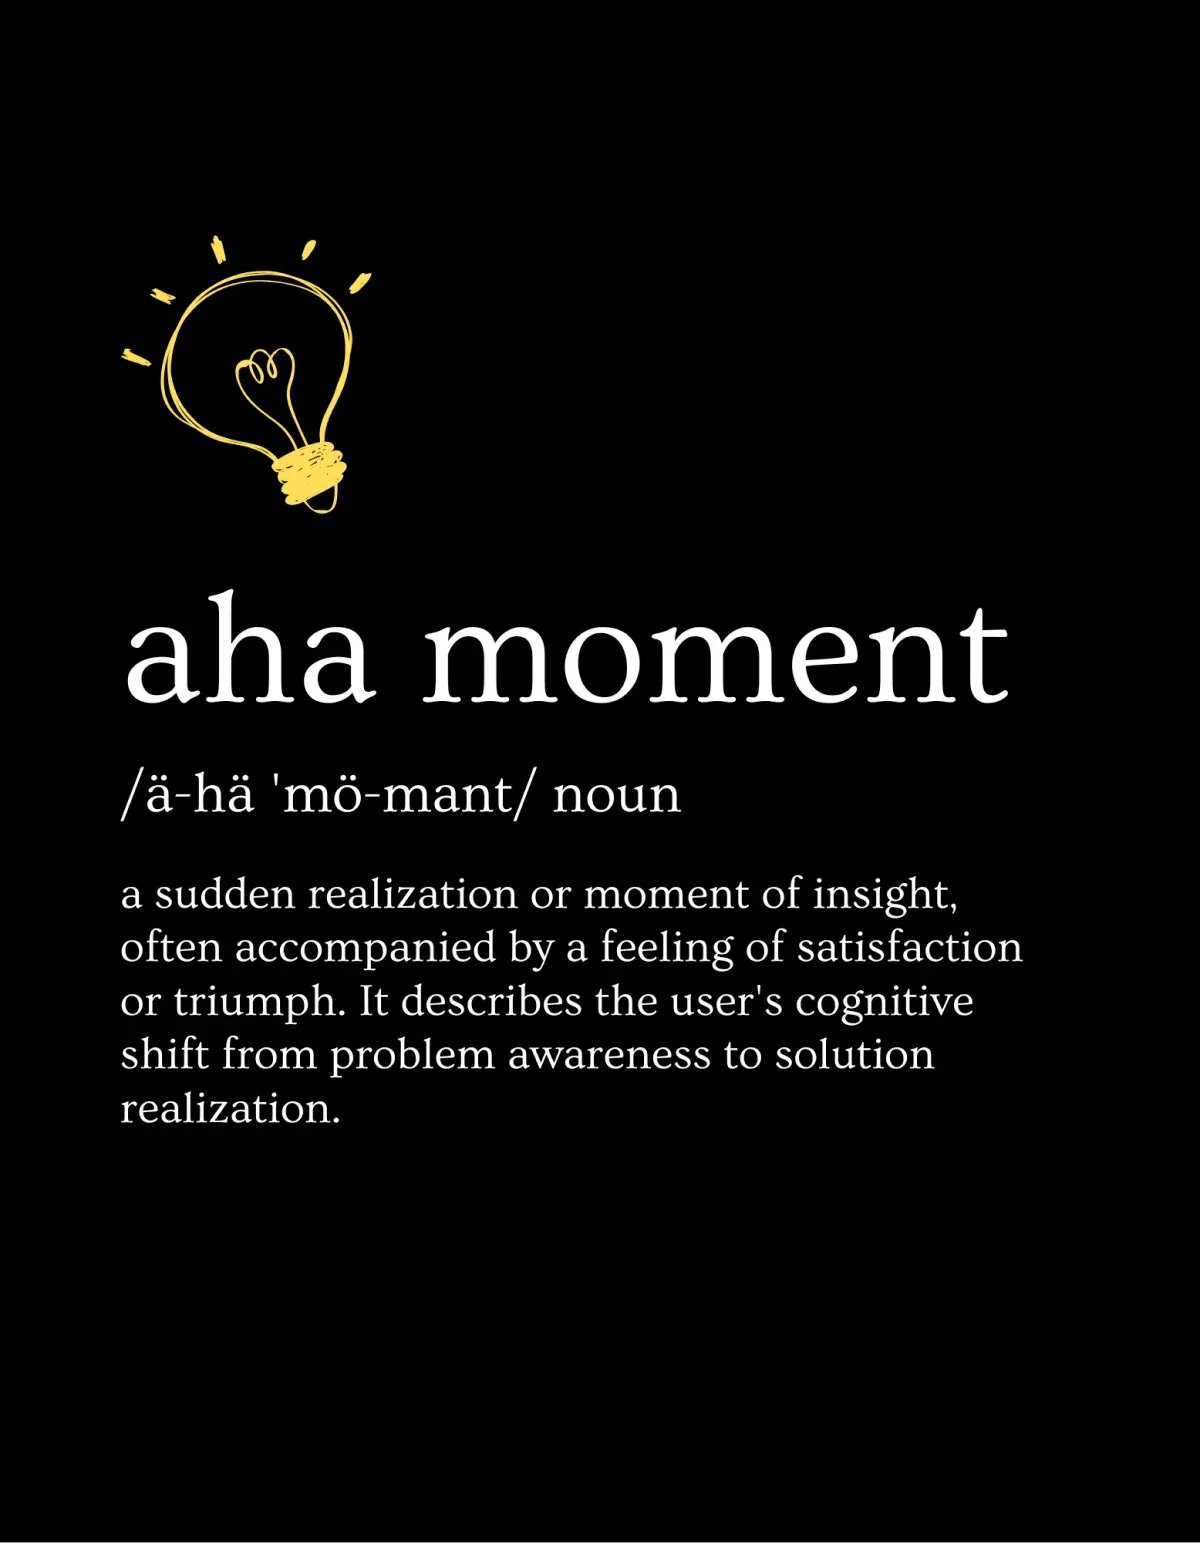 Definition of  “aha moment”